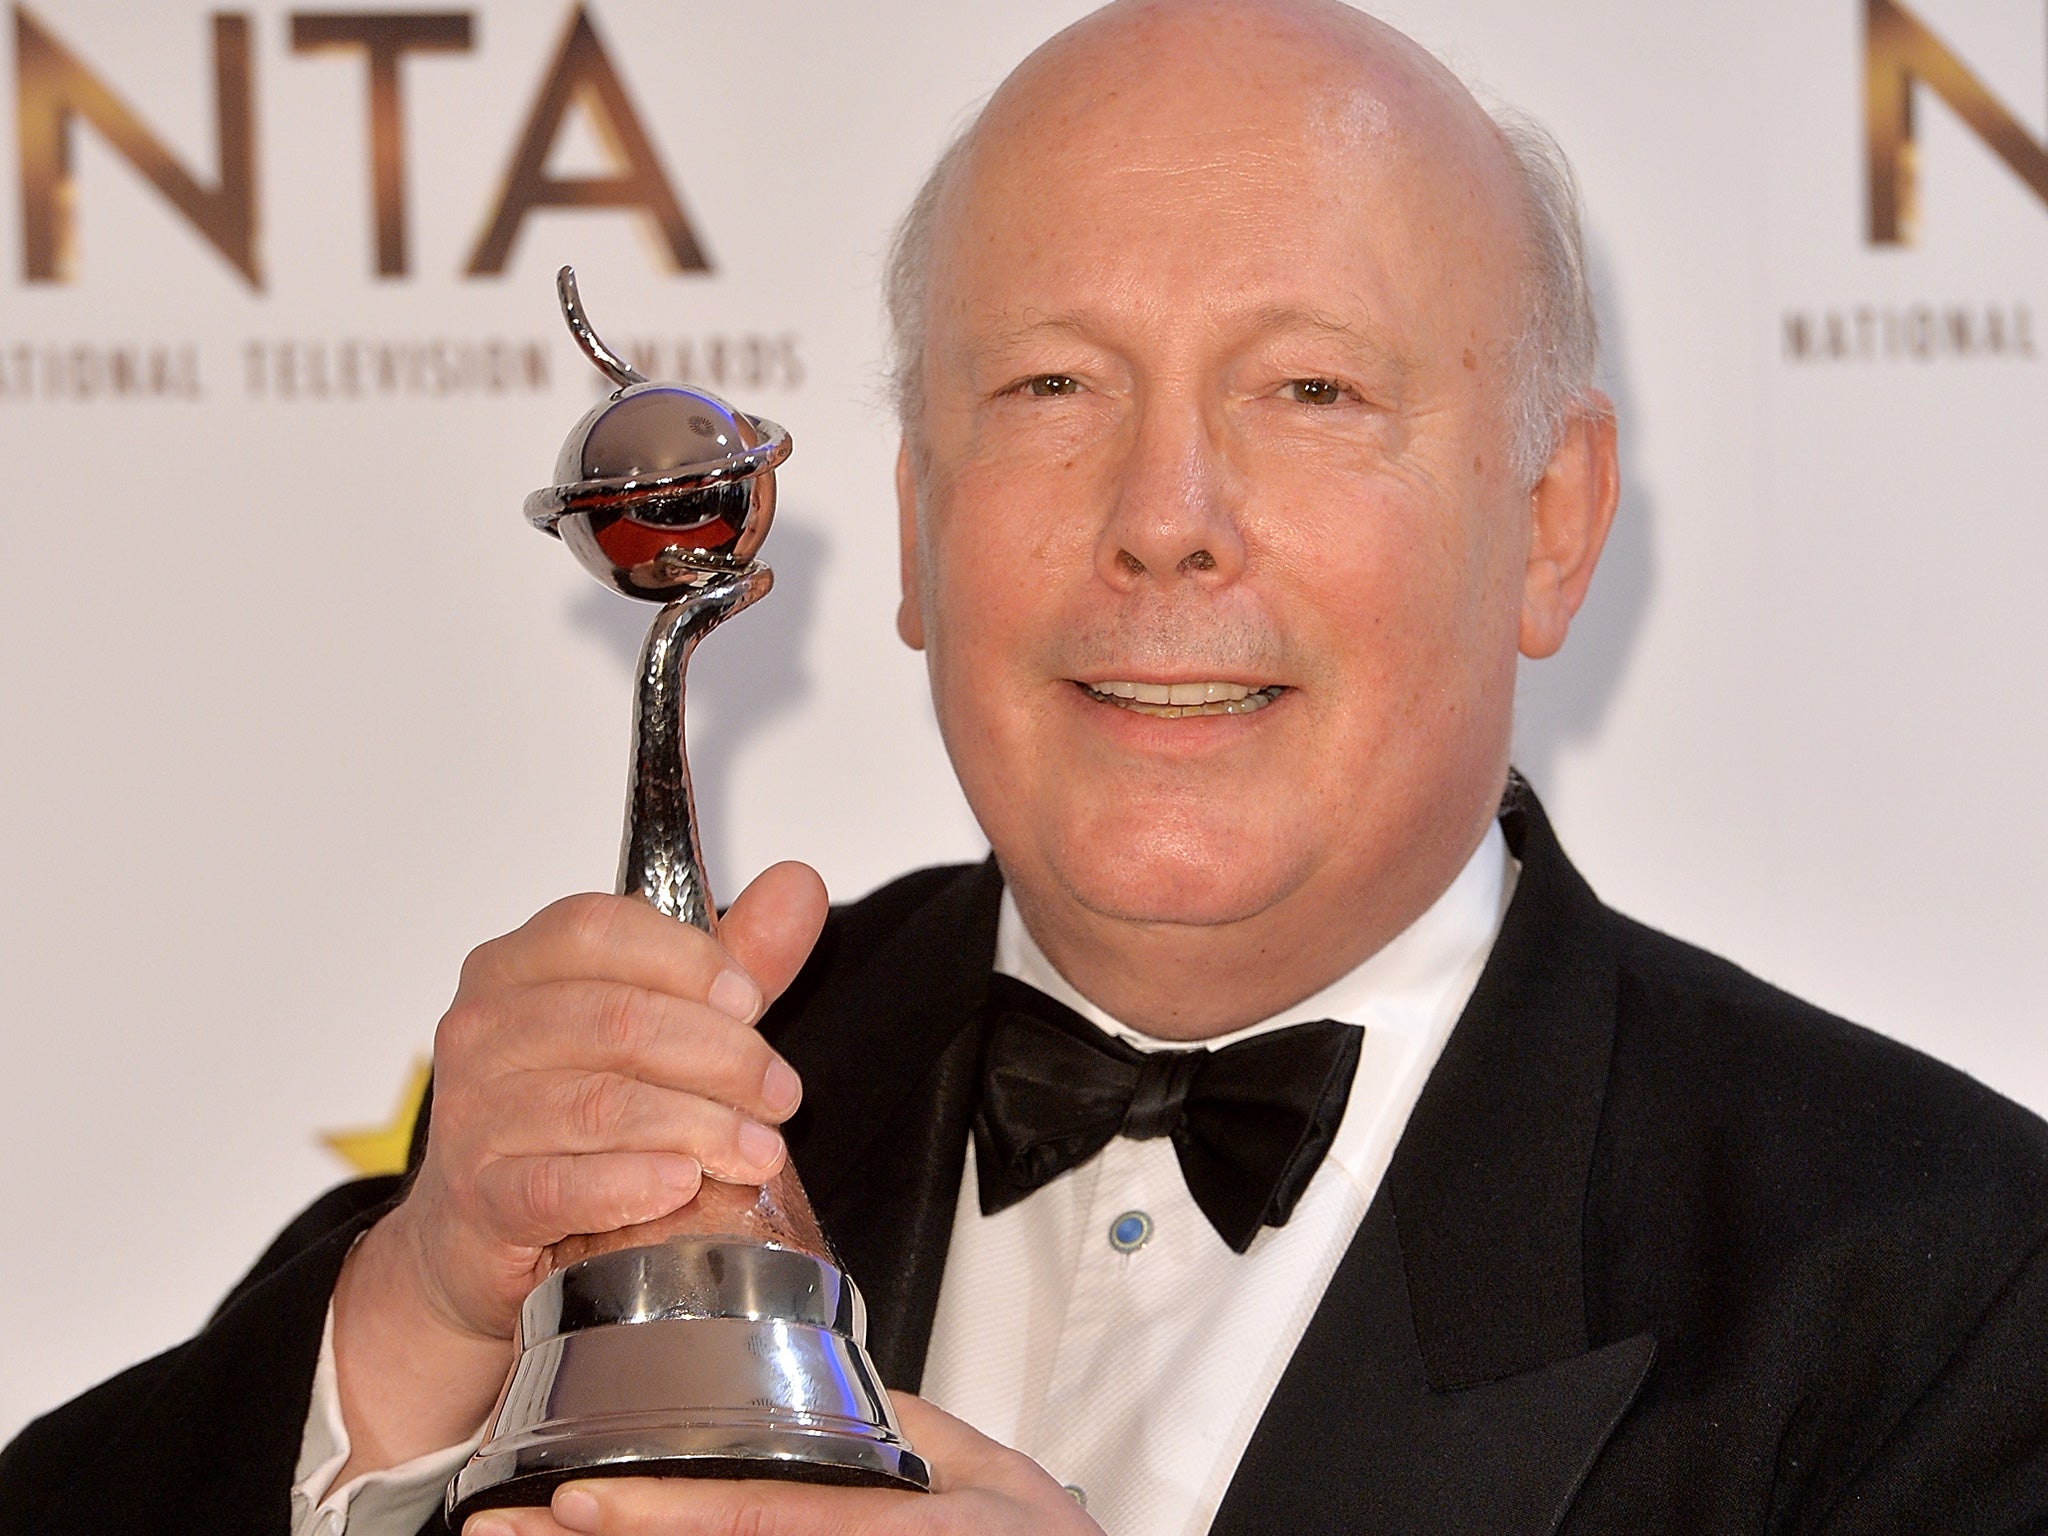 Lord Fellowes said he didn't want Downton to risk damaging its legacy as a landmark show by continuing for too long